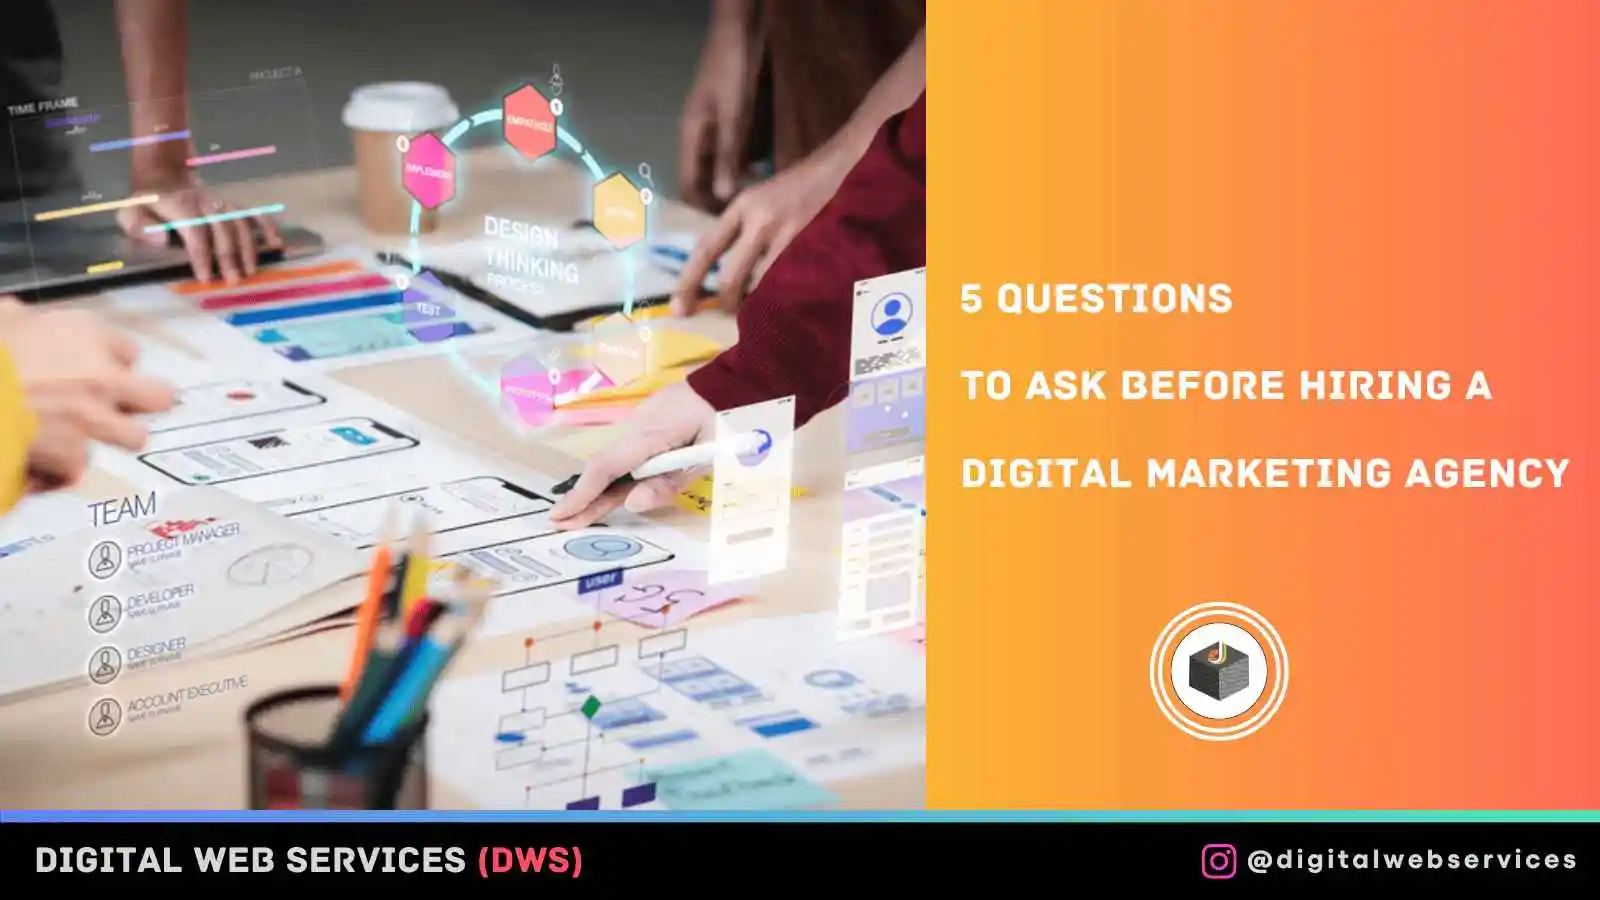 5 Questions To Ask Before Hiring A Digital Marketing Agency